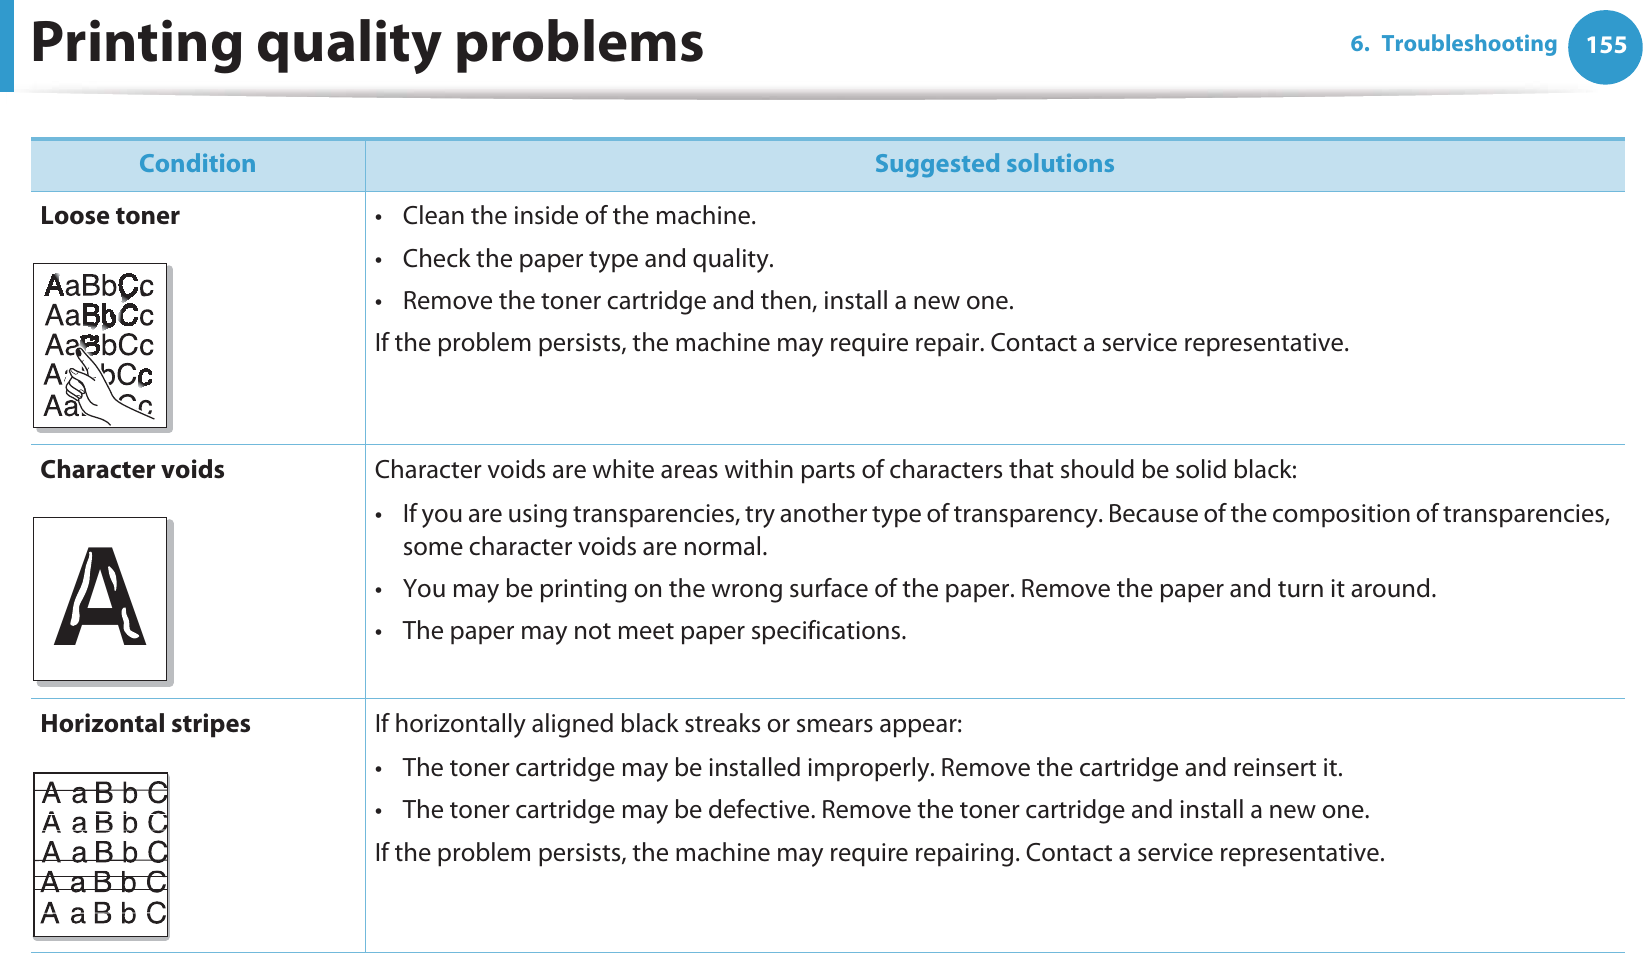 Printing quality problems 1556. TroubleshootingLoose toner • Clean the inside of the machine.• Check the paper type and quality.• Remove the toner cartridge and then, install a new one.If the problem persists, the machine may require repair. Contact a service representative.Character voids Character voids are white areas within parts of characters that should be solid black:• If you are using transparencies, try another type of transparency. Because of the composition of transparencies, some character voids are normal. • You may be printing on the wrong surface of the paper. Remove the paper and turn it around. • The paper may not meet paper specifications.Horizontal stripes If horizontally aligned black streaks or smears appear:• The toner cartridge may be installed improperly. Remove the cartridge and reinsert it.• The toner cartridge may be defective. Remove the toner cartridge and install a new one.If the problem persists, the machine may require repairing. Contact a service representative.Condition Suggested solutionsA